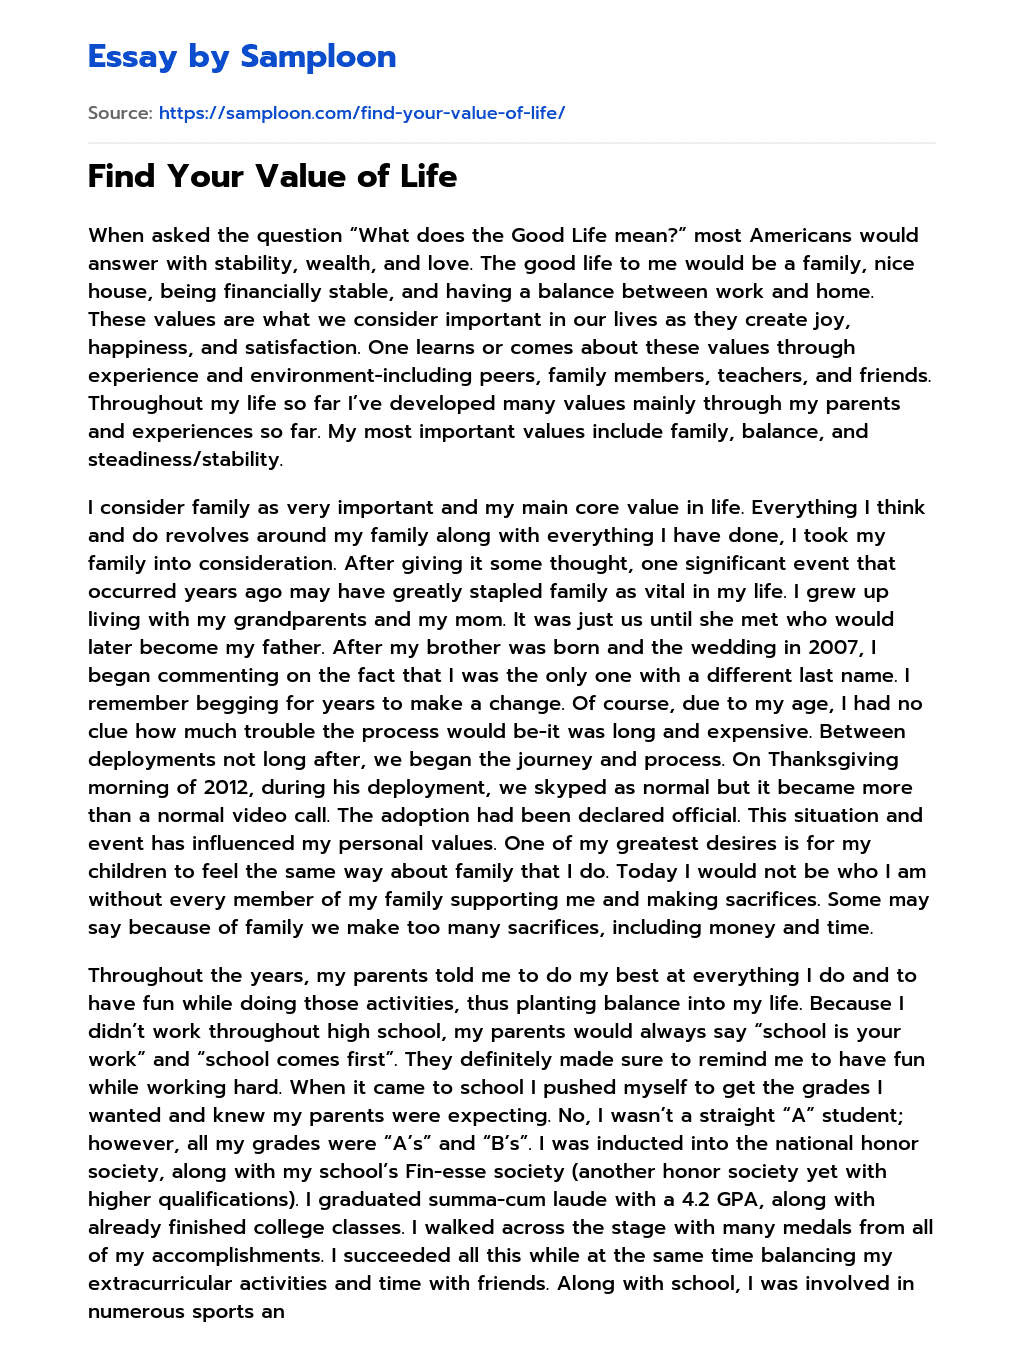 Find Your Value of Life essay